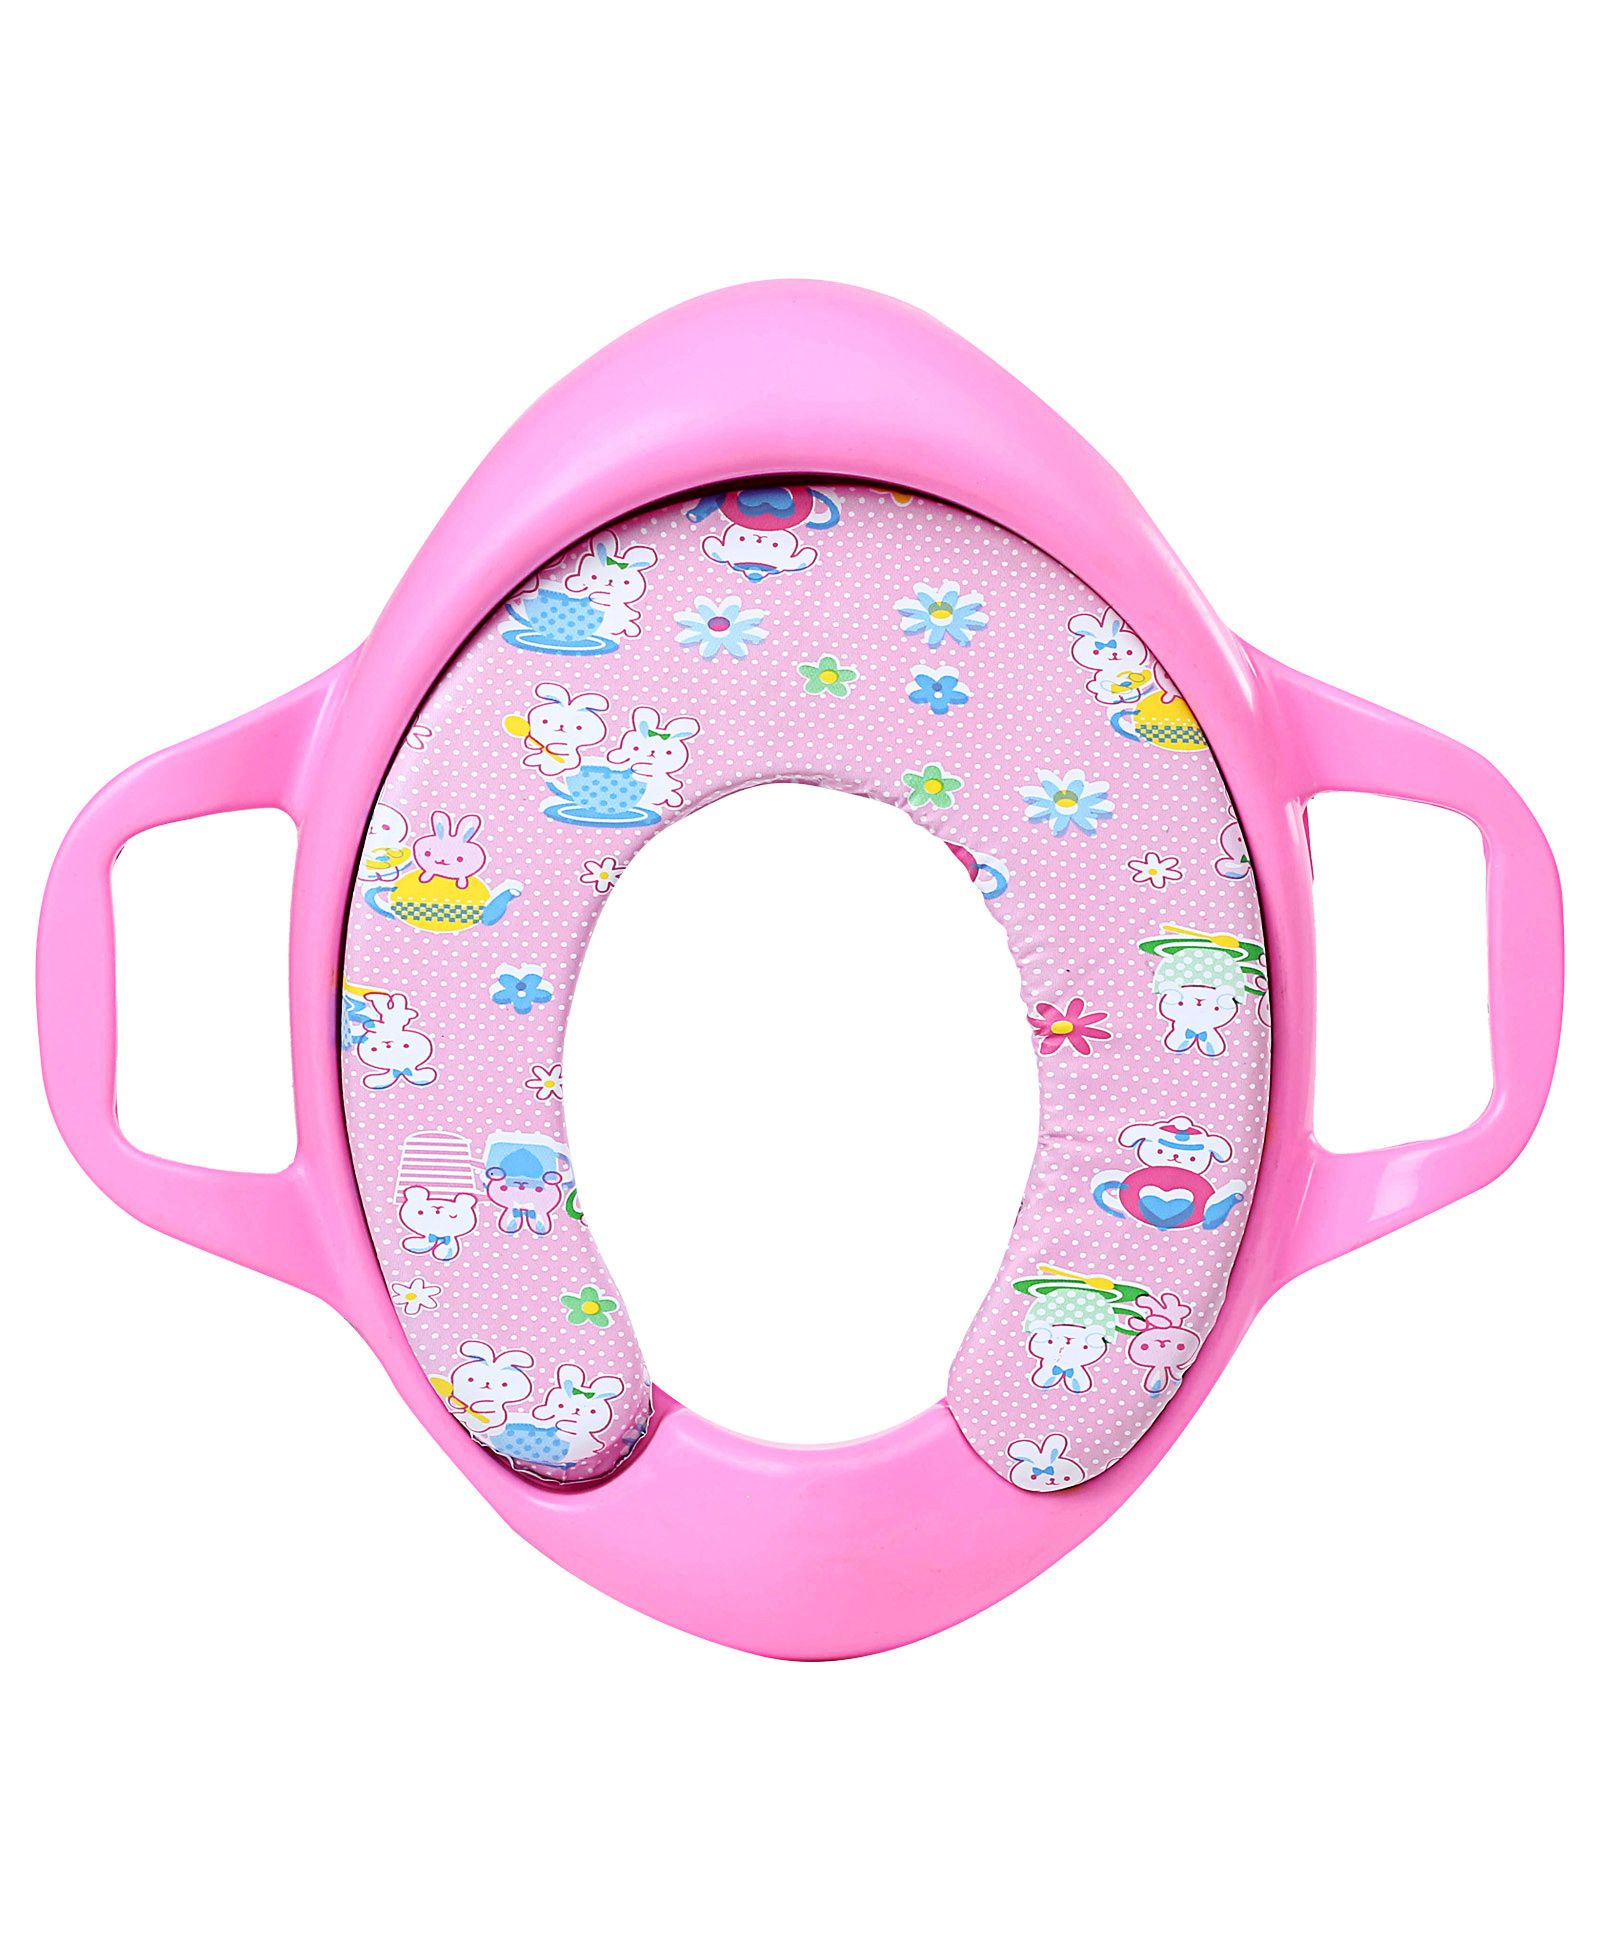 Buy Cushioned Baby Toilet Training Potty Seat With Handles Pink Online